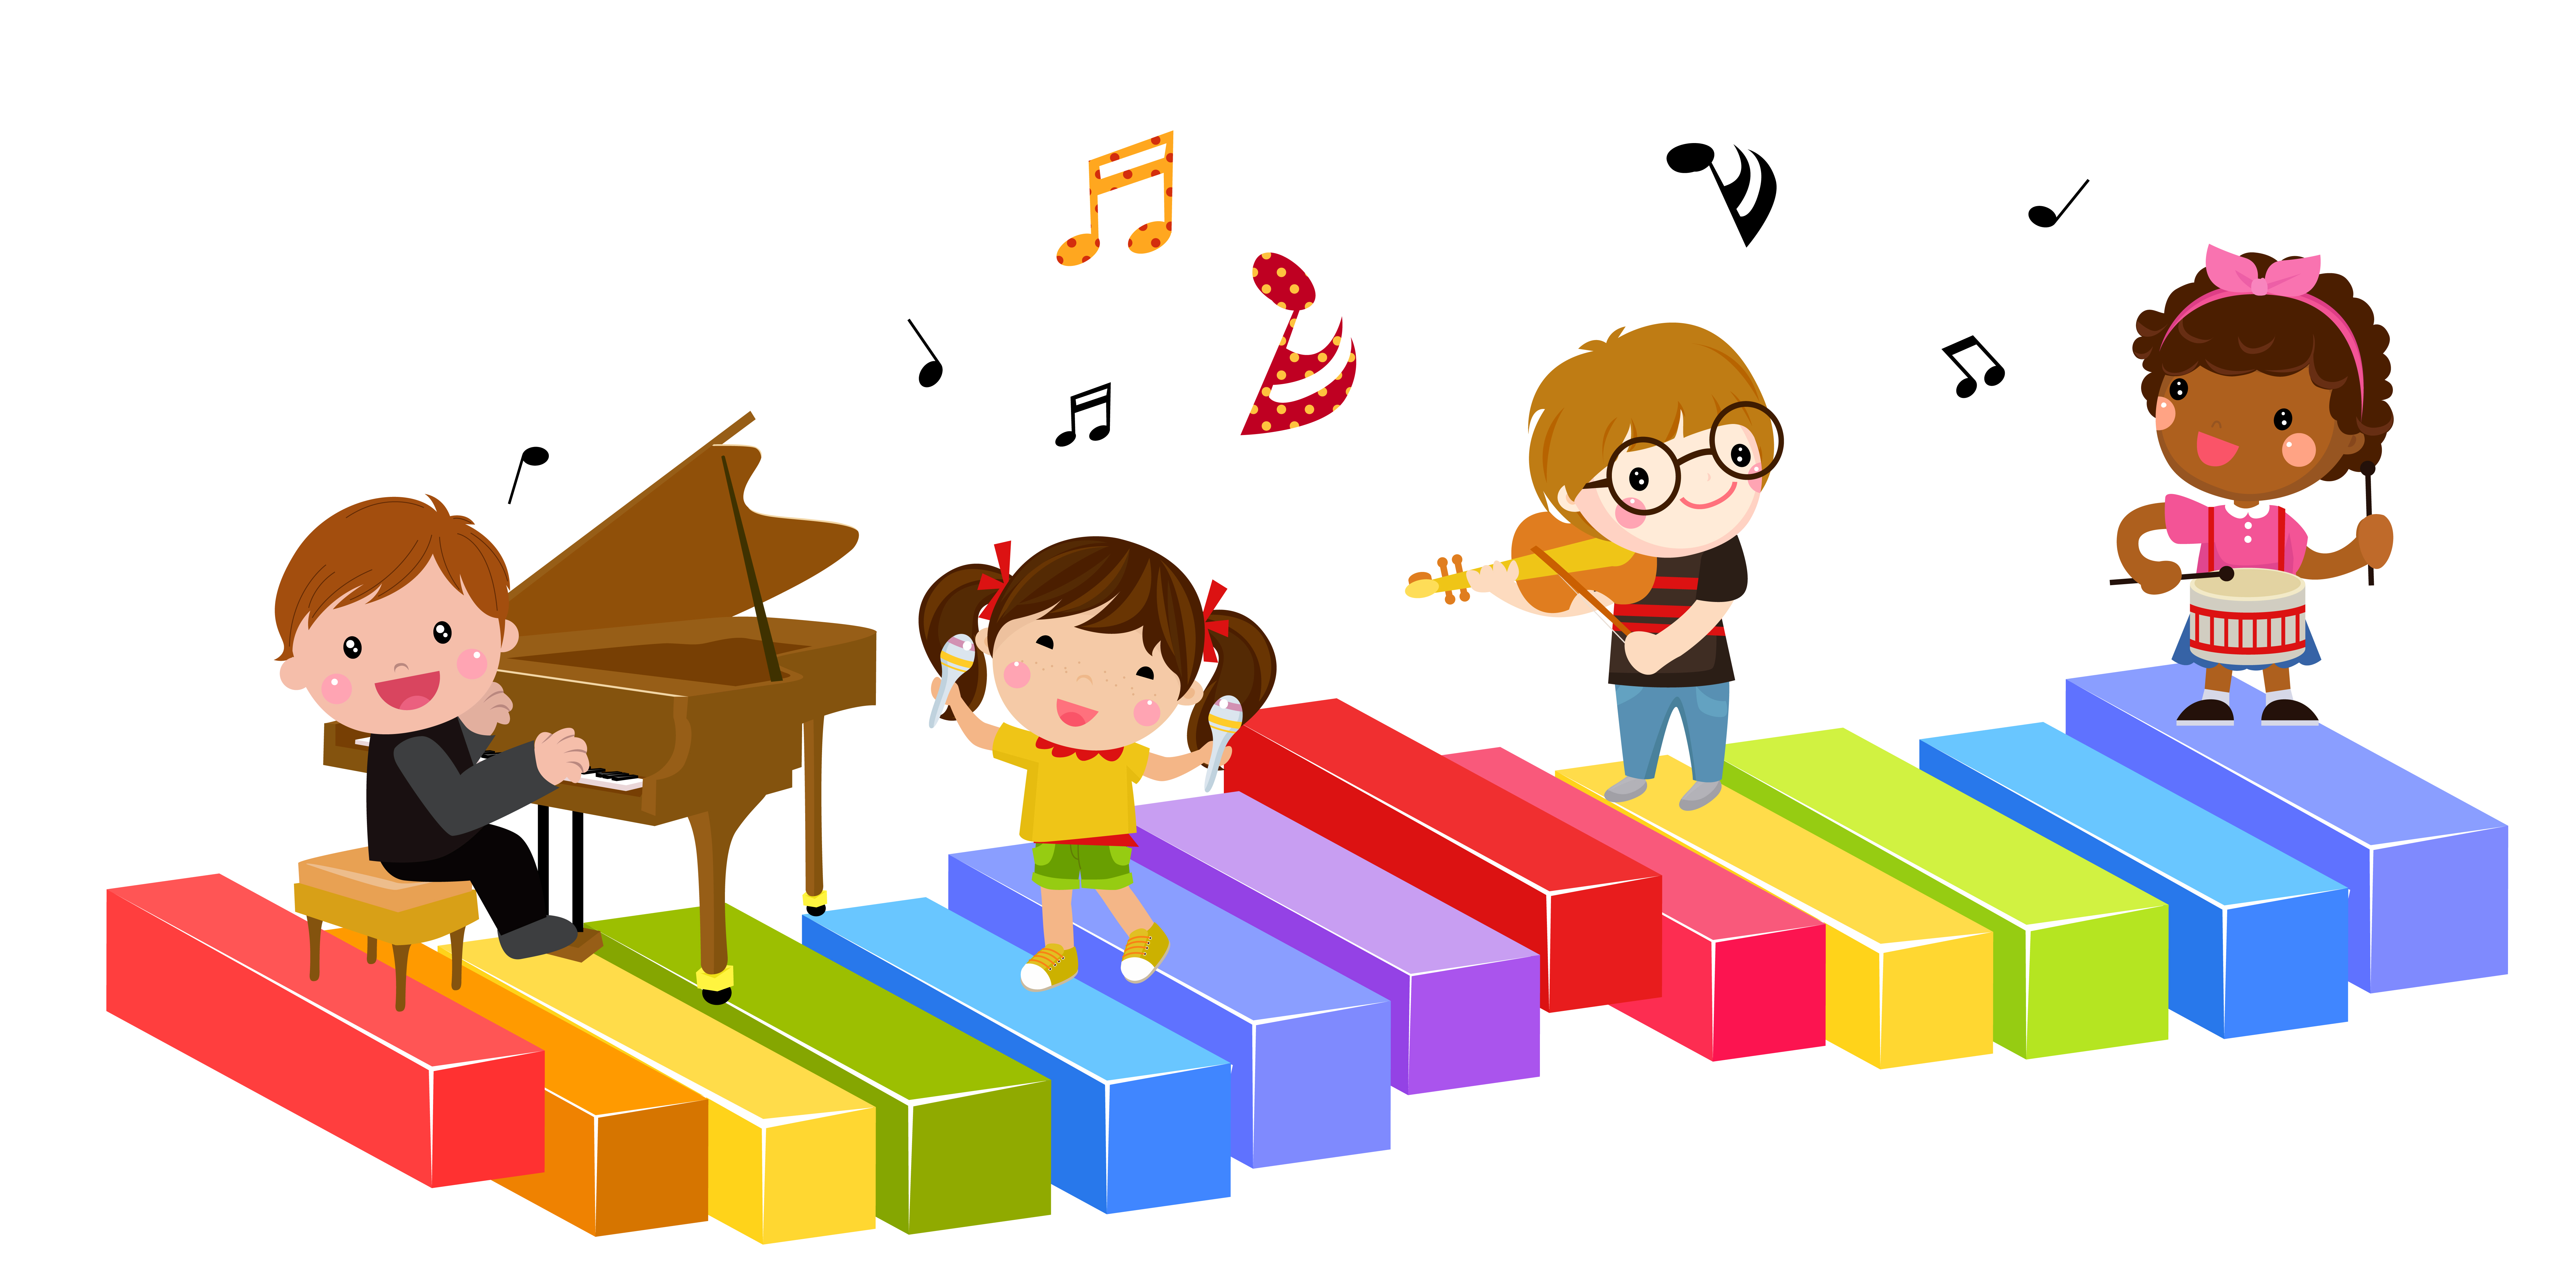 children on colorful keyboard playing different instruments